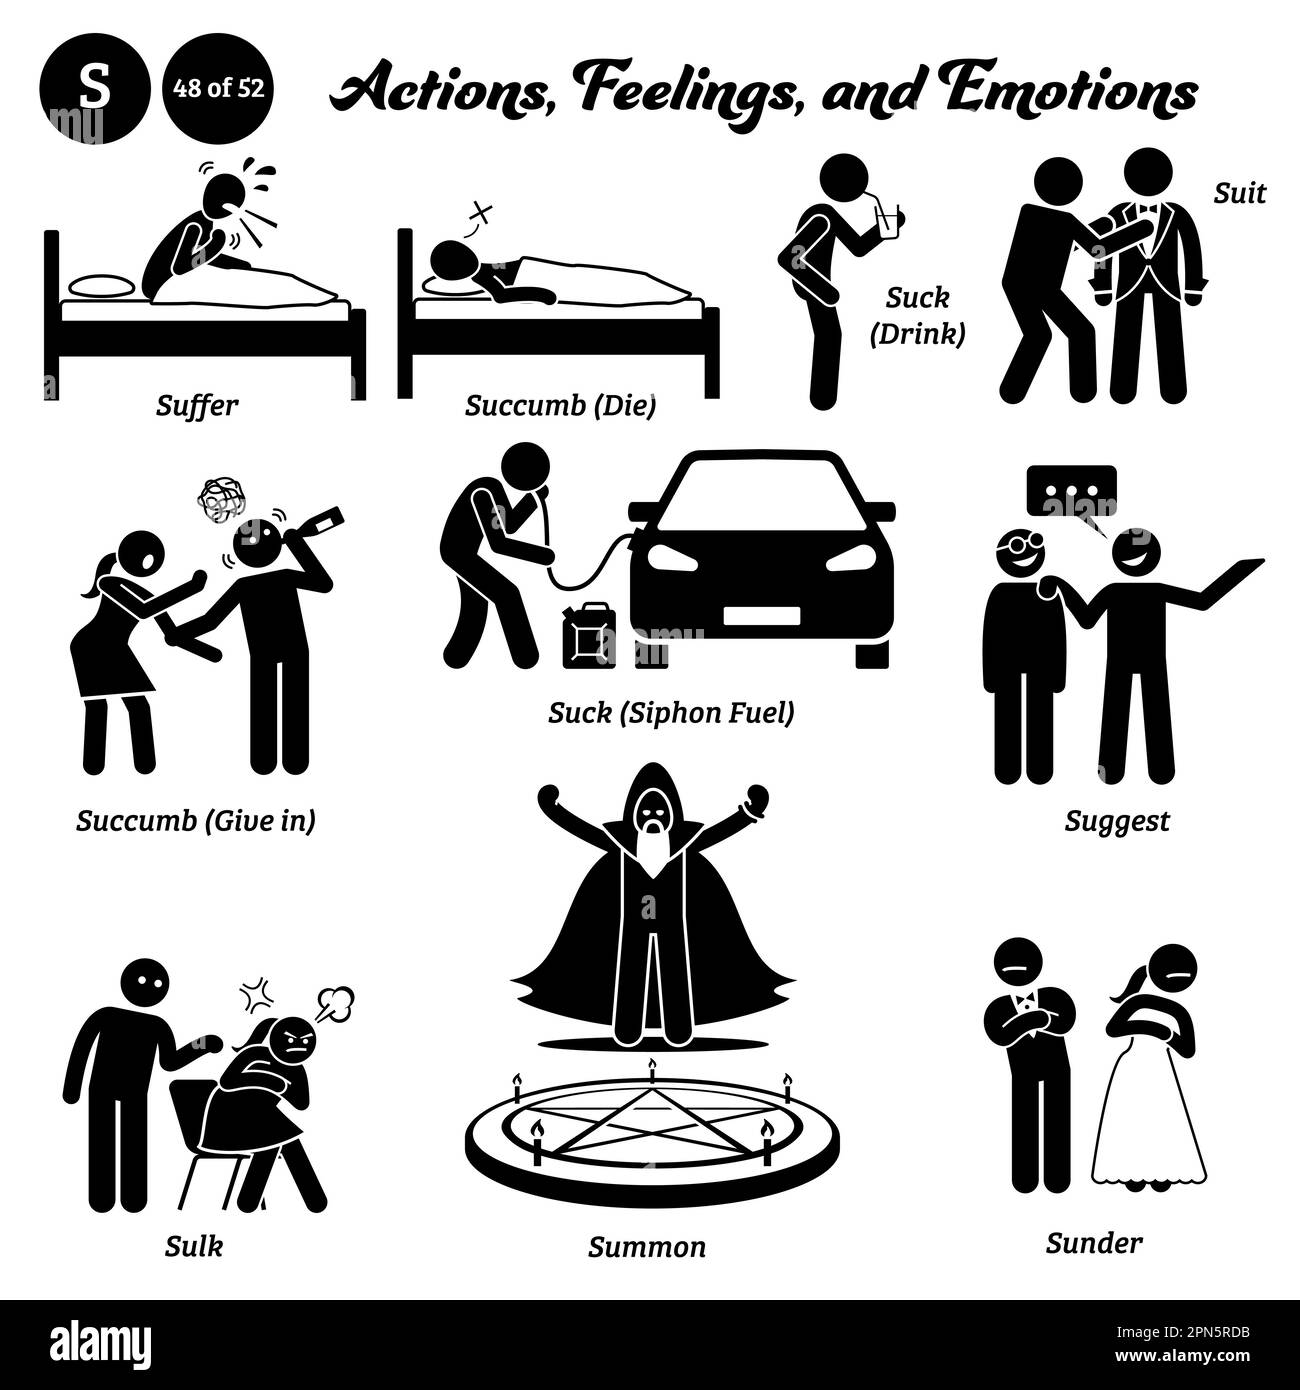 Stick figure human people man action, feelings, and emotions icons alphabet S. Suffer, succumb, die, suck, drink, suit, give in, siphon, fuel, suggest Stock Vector